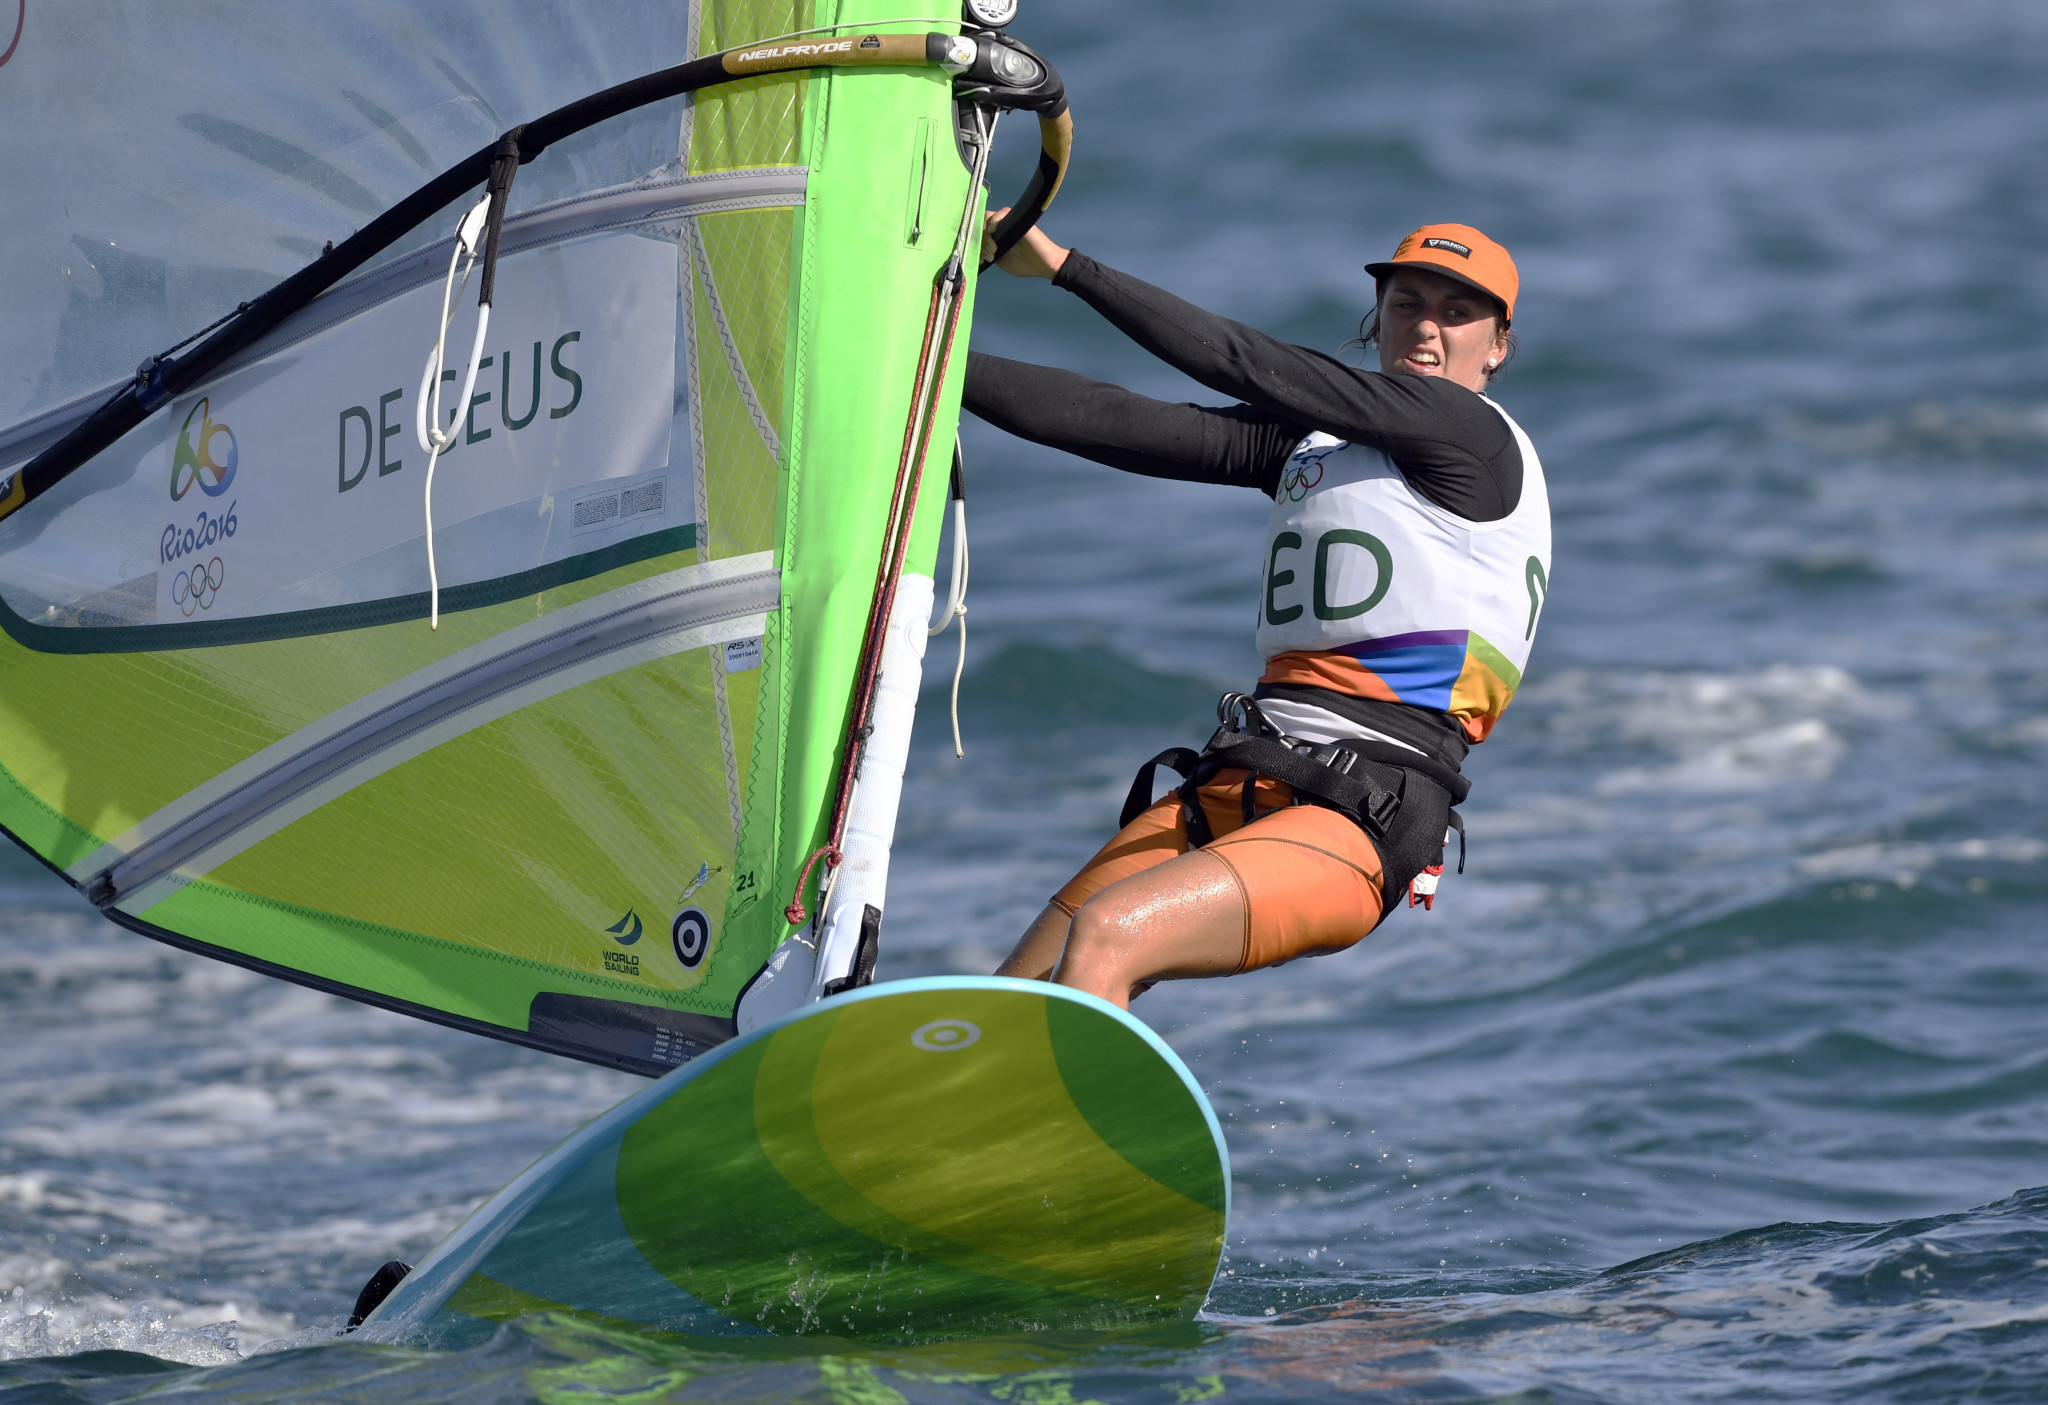 Israel's Drihan retains overall lead at RS:X World Championships